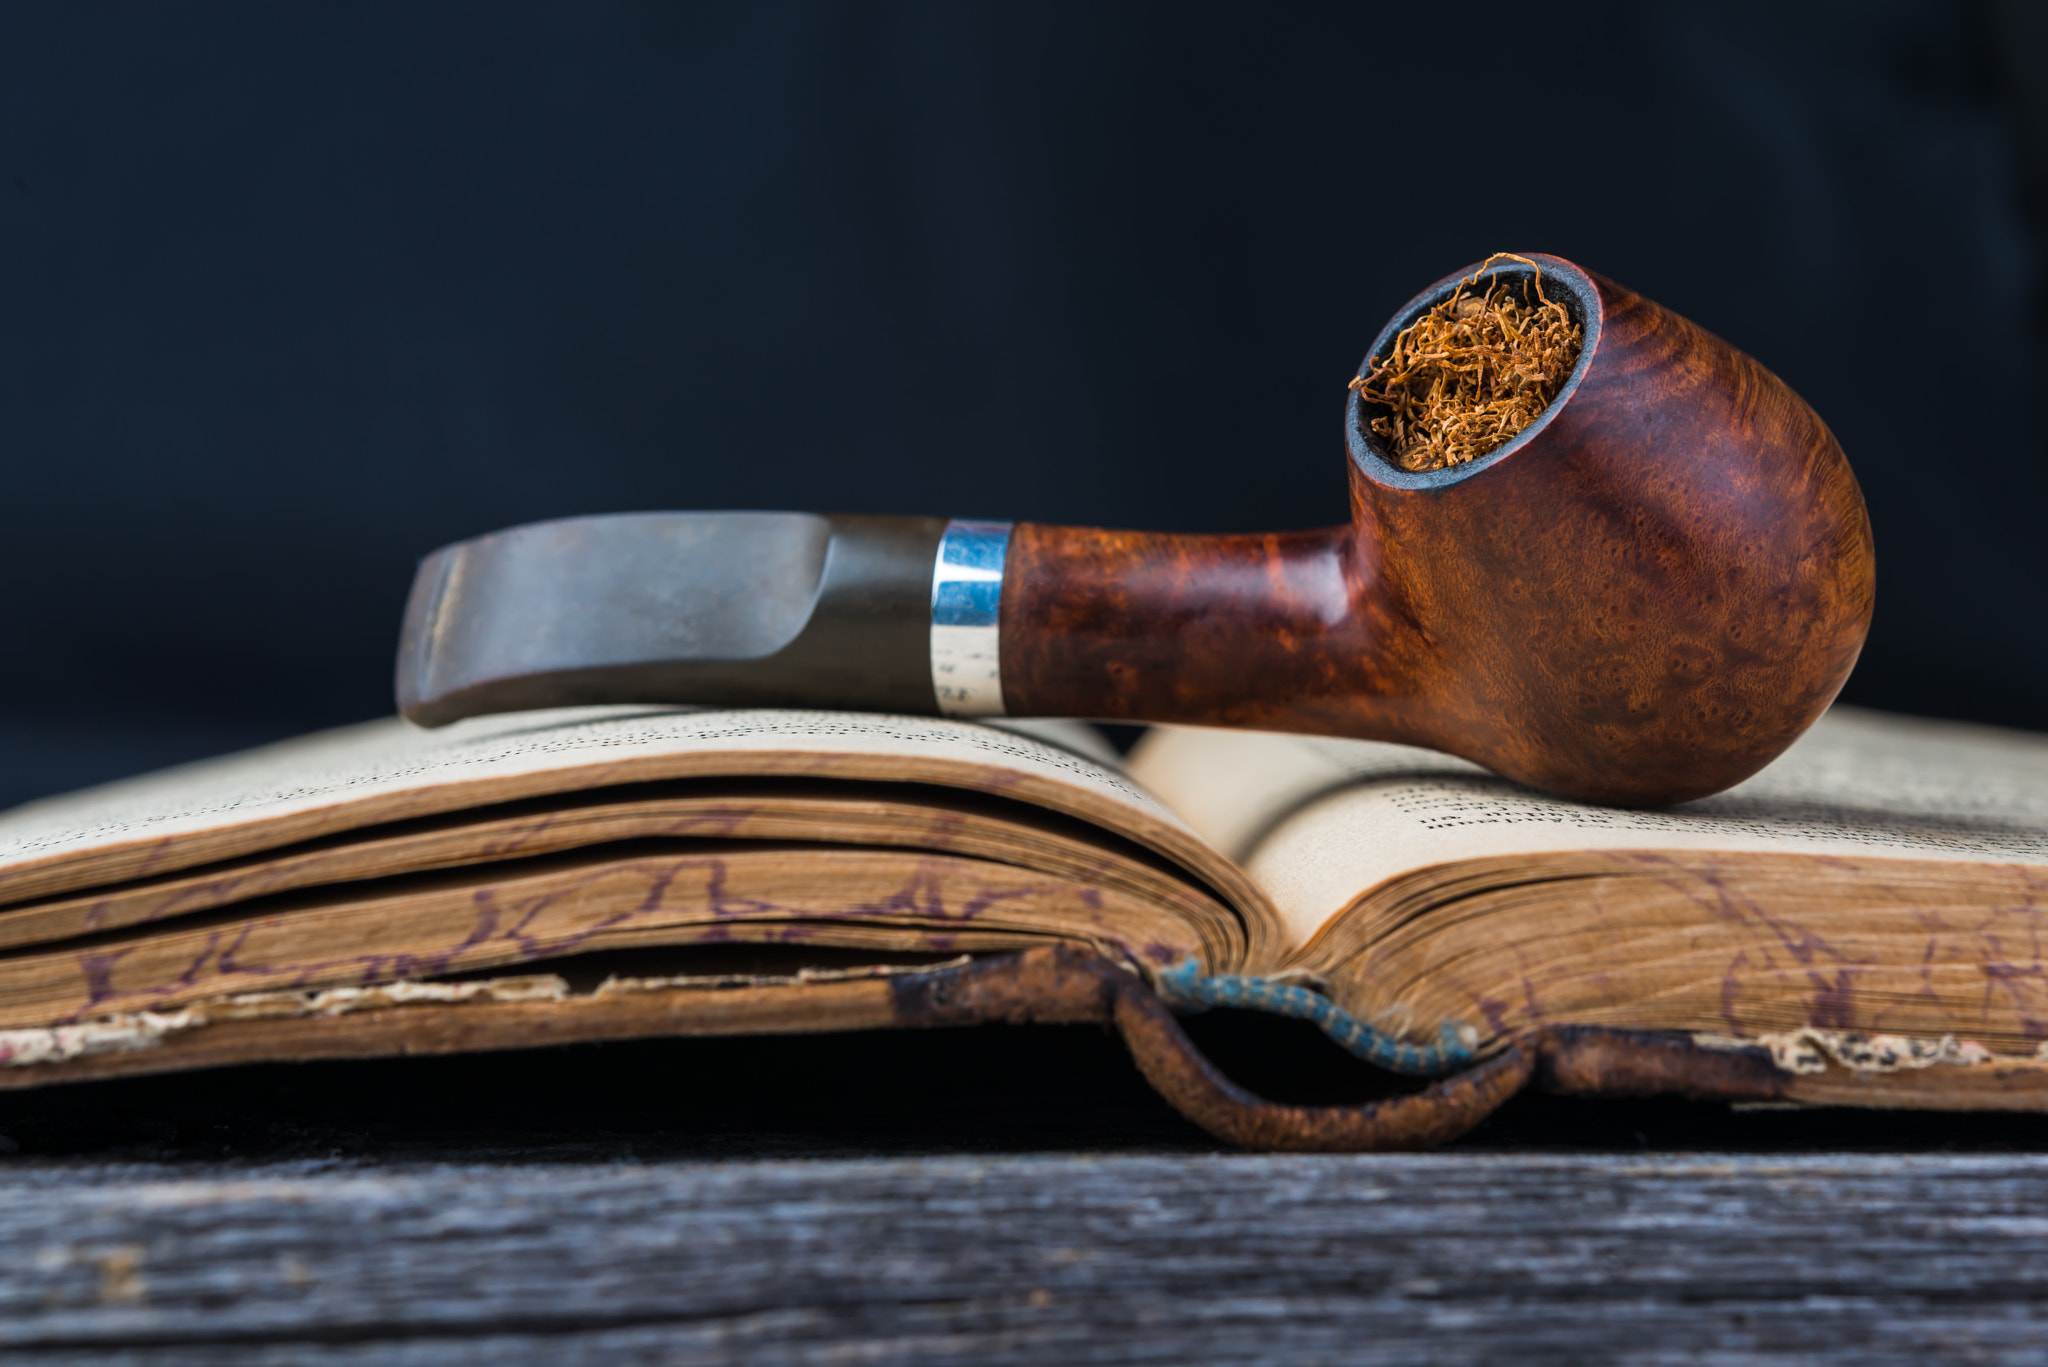 smoking pipe on the opened old book in wooden grey table.